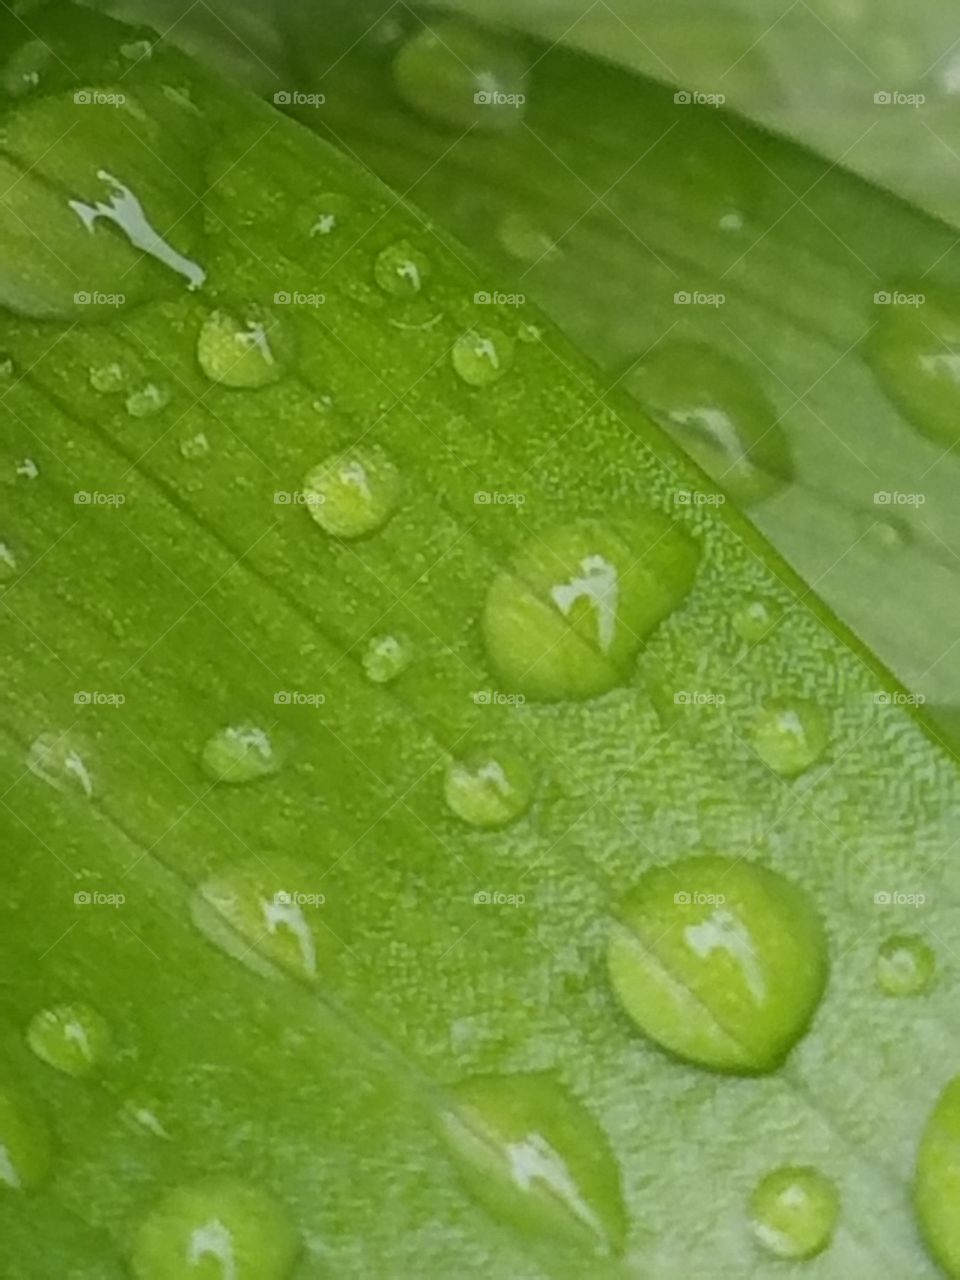 Water droplets on a lily leaf.